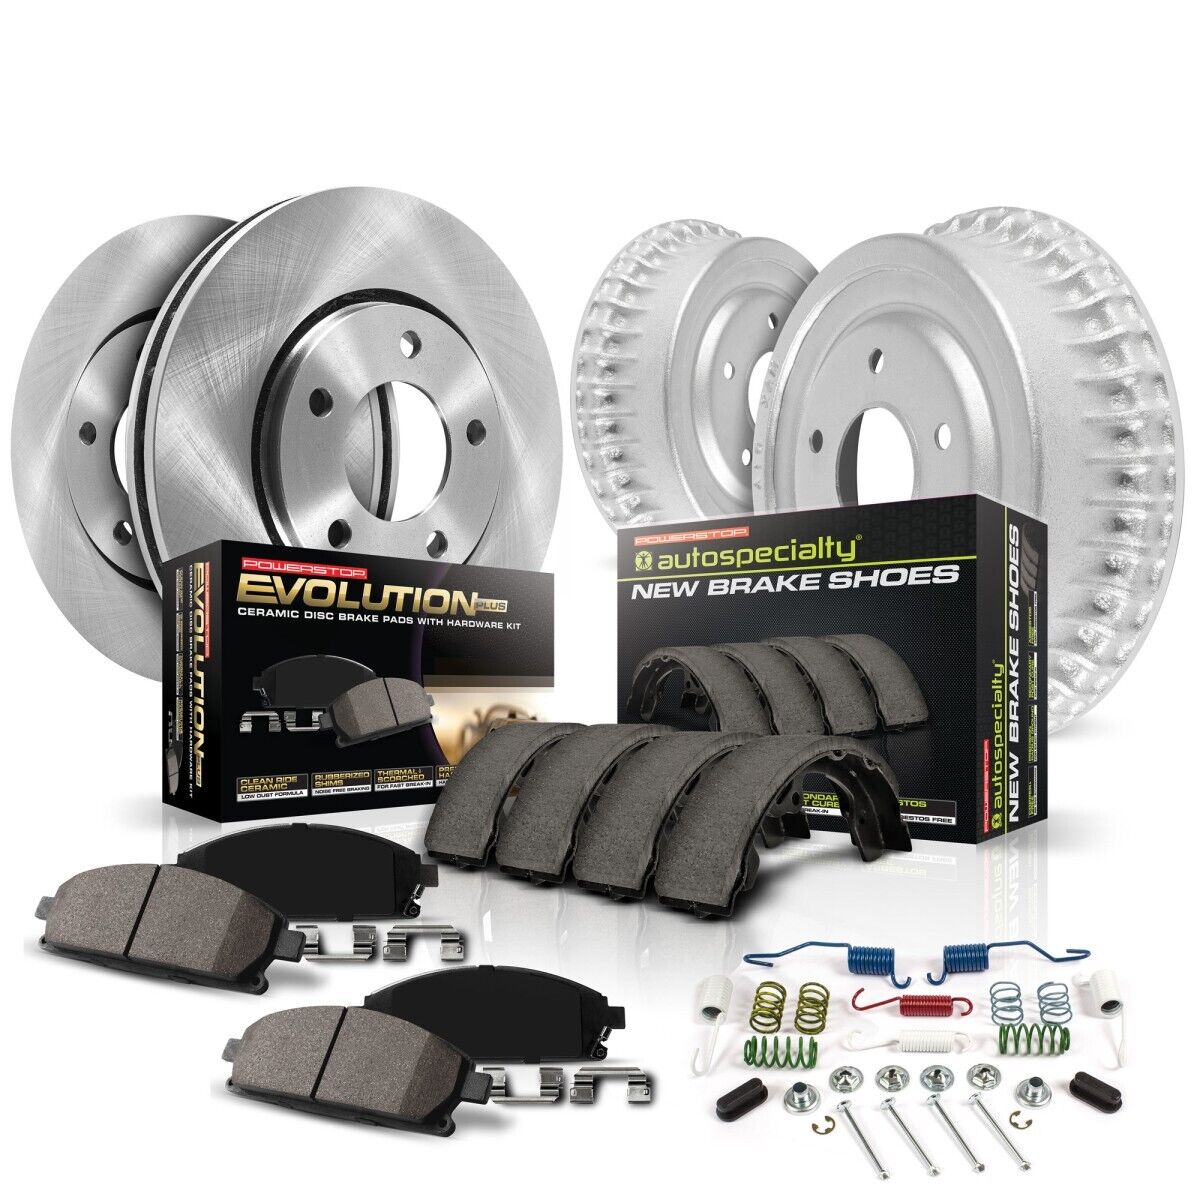 KOE15020DK Powerstop Brake Disc And Drum Kits 4-Wheel Set Front & Rear for Chevy